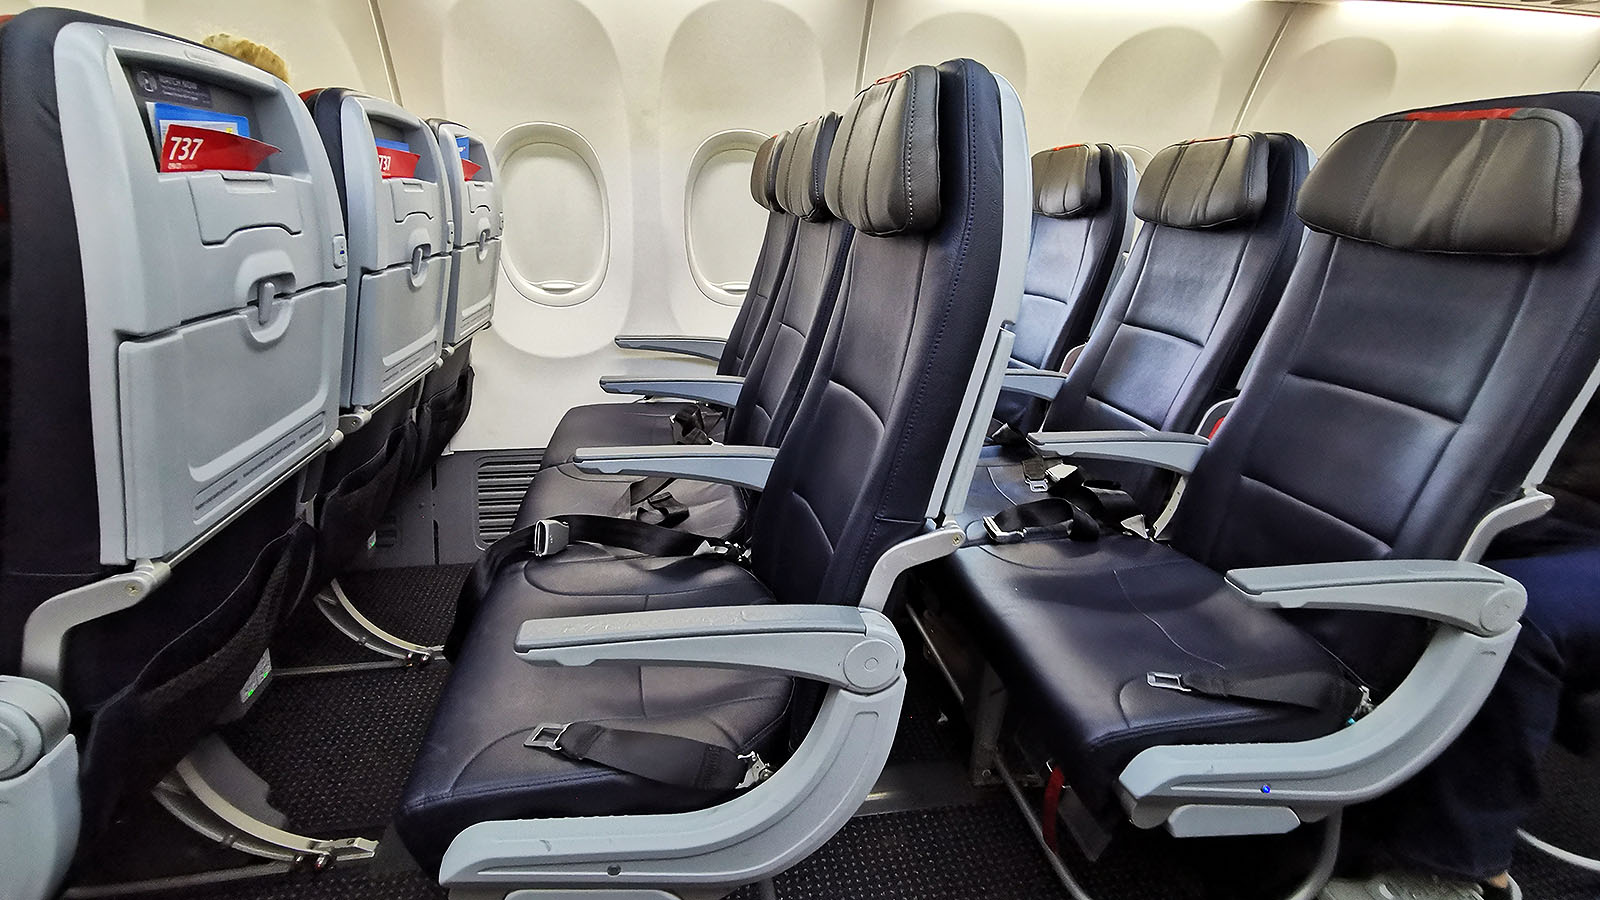 Chairs in American Airlines Boeing 737 Economy